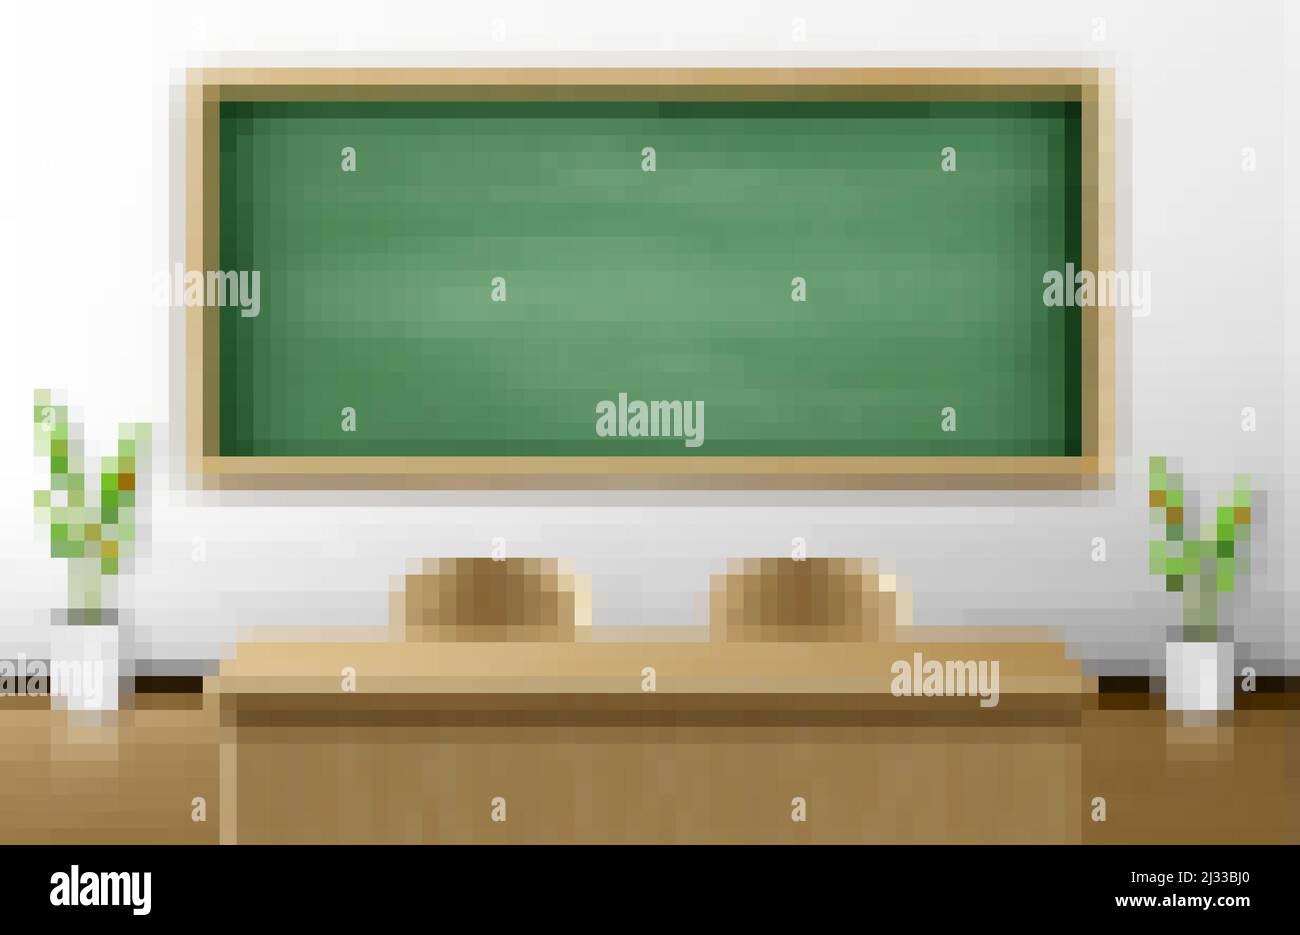 Abstract Textured Green Background Chalkboard Backdrops D636